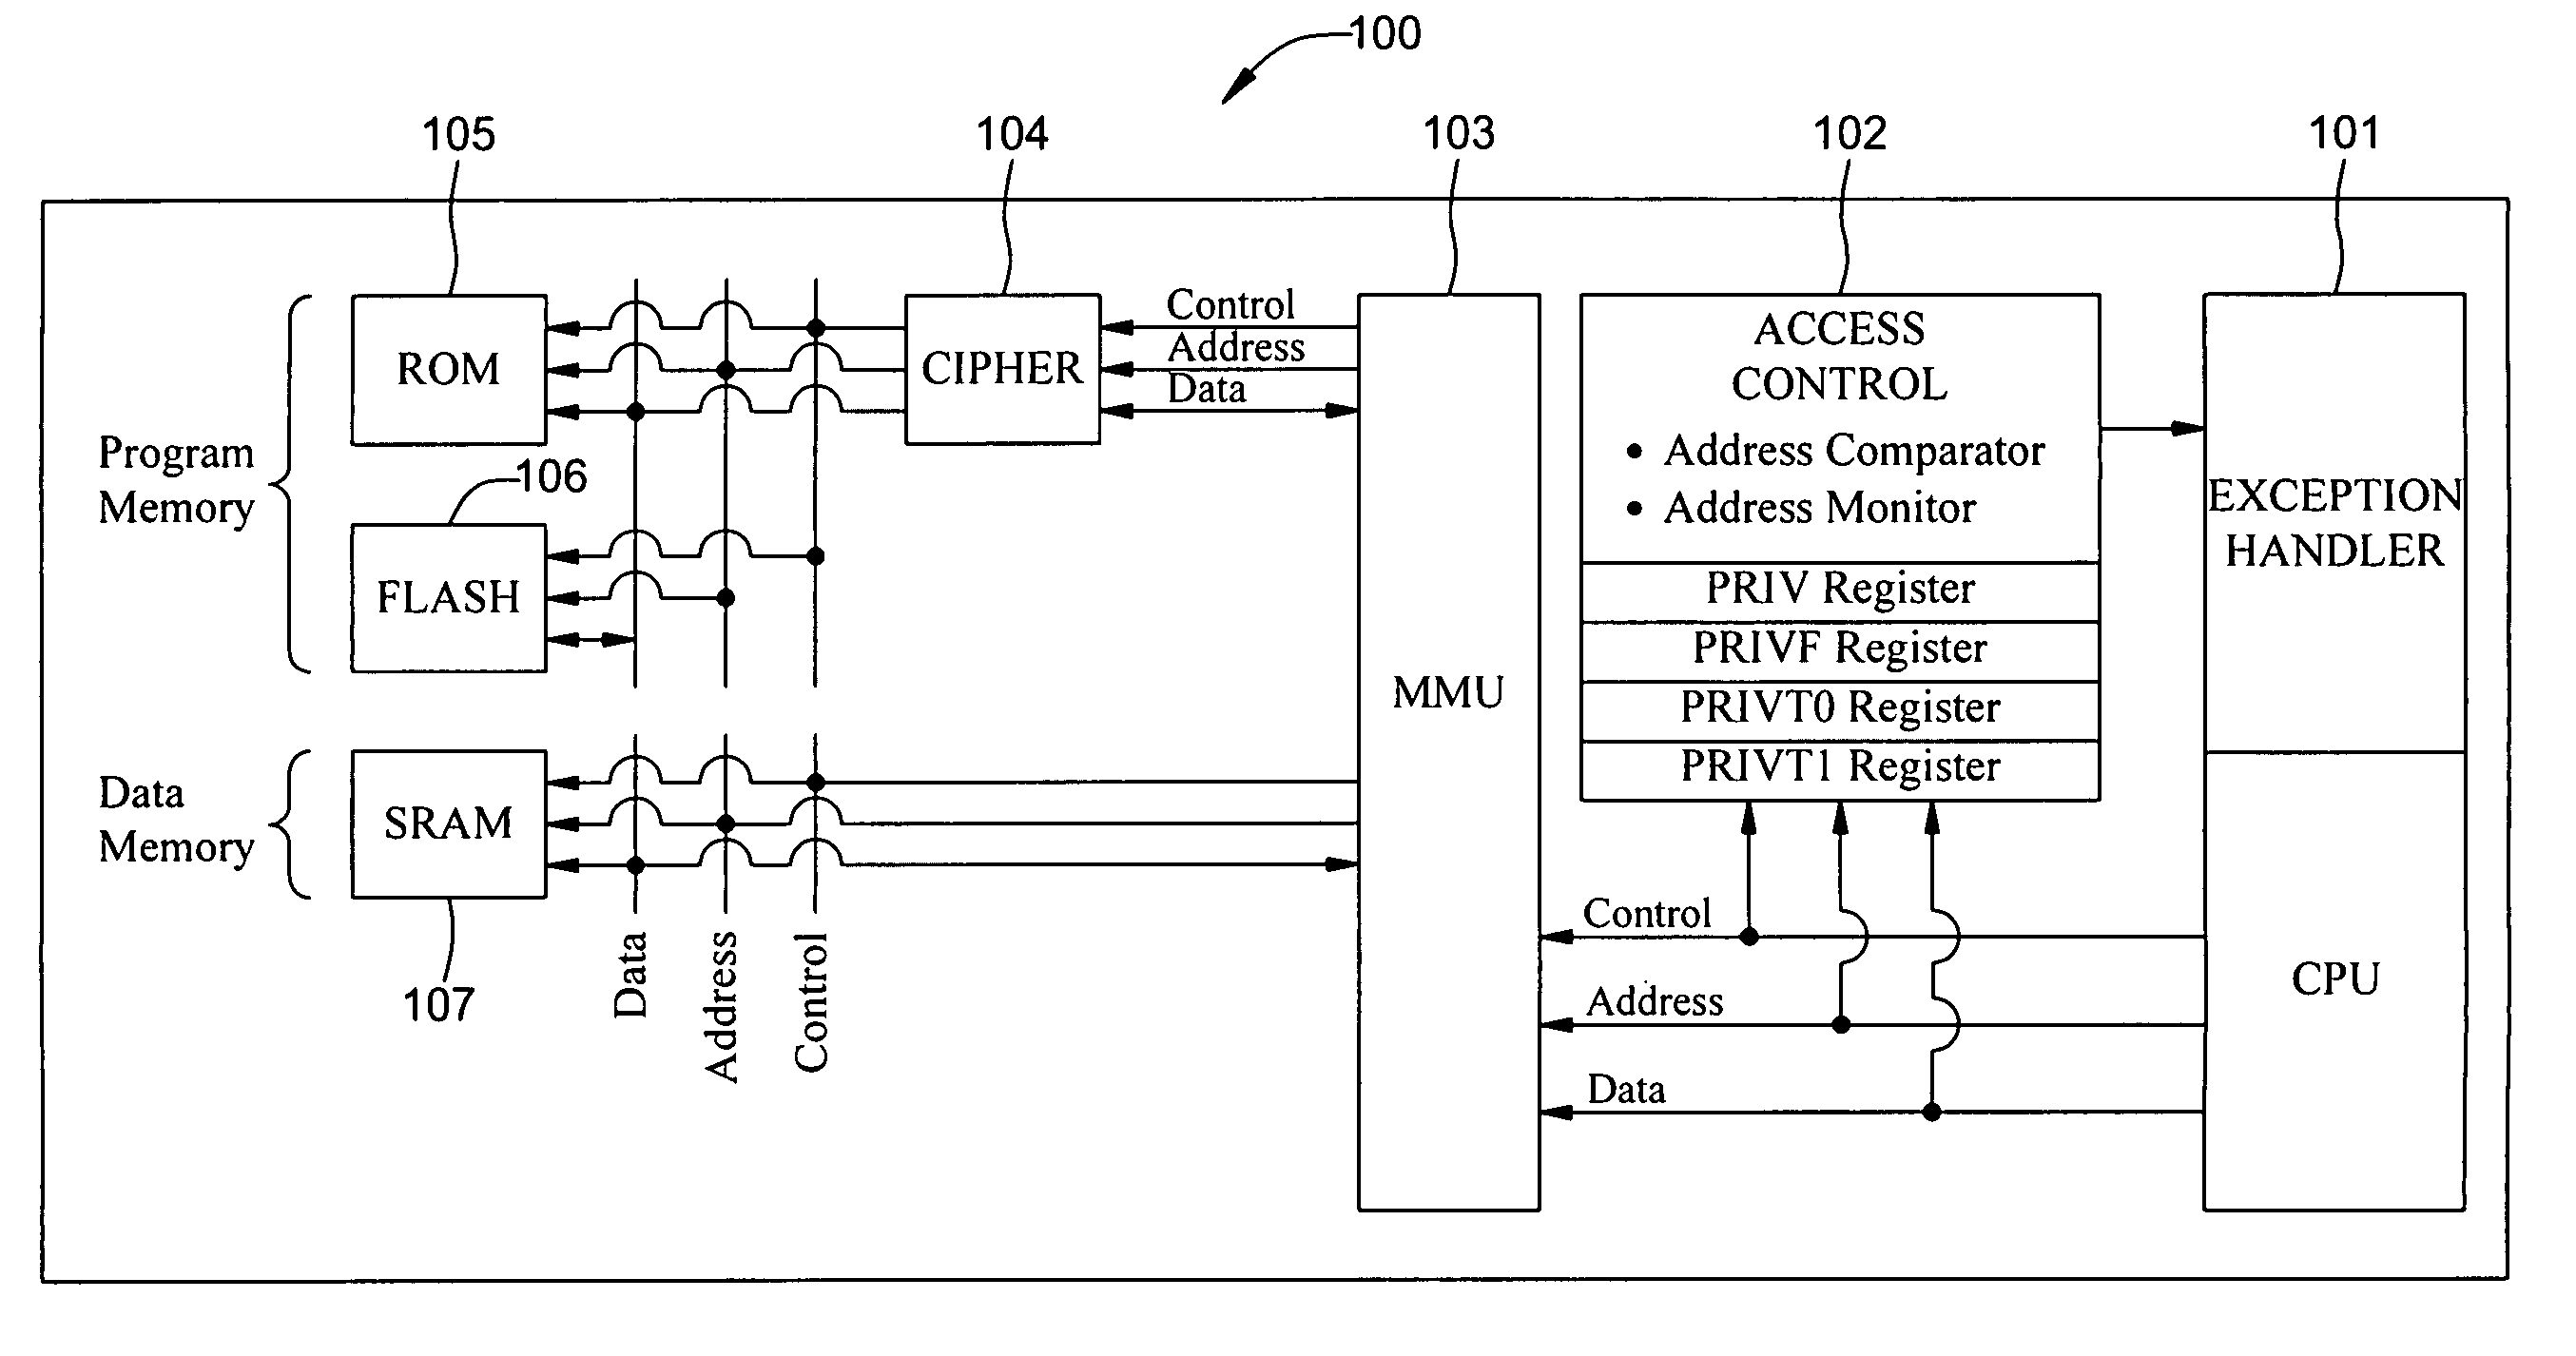 Multi-layer content protecting microcontroller